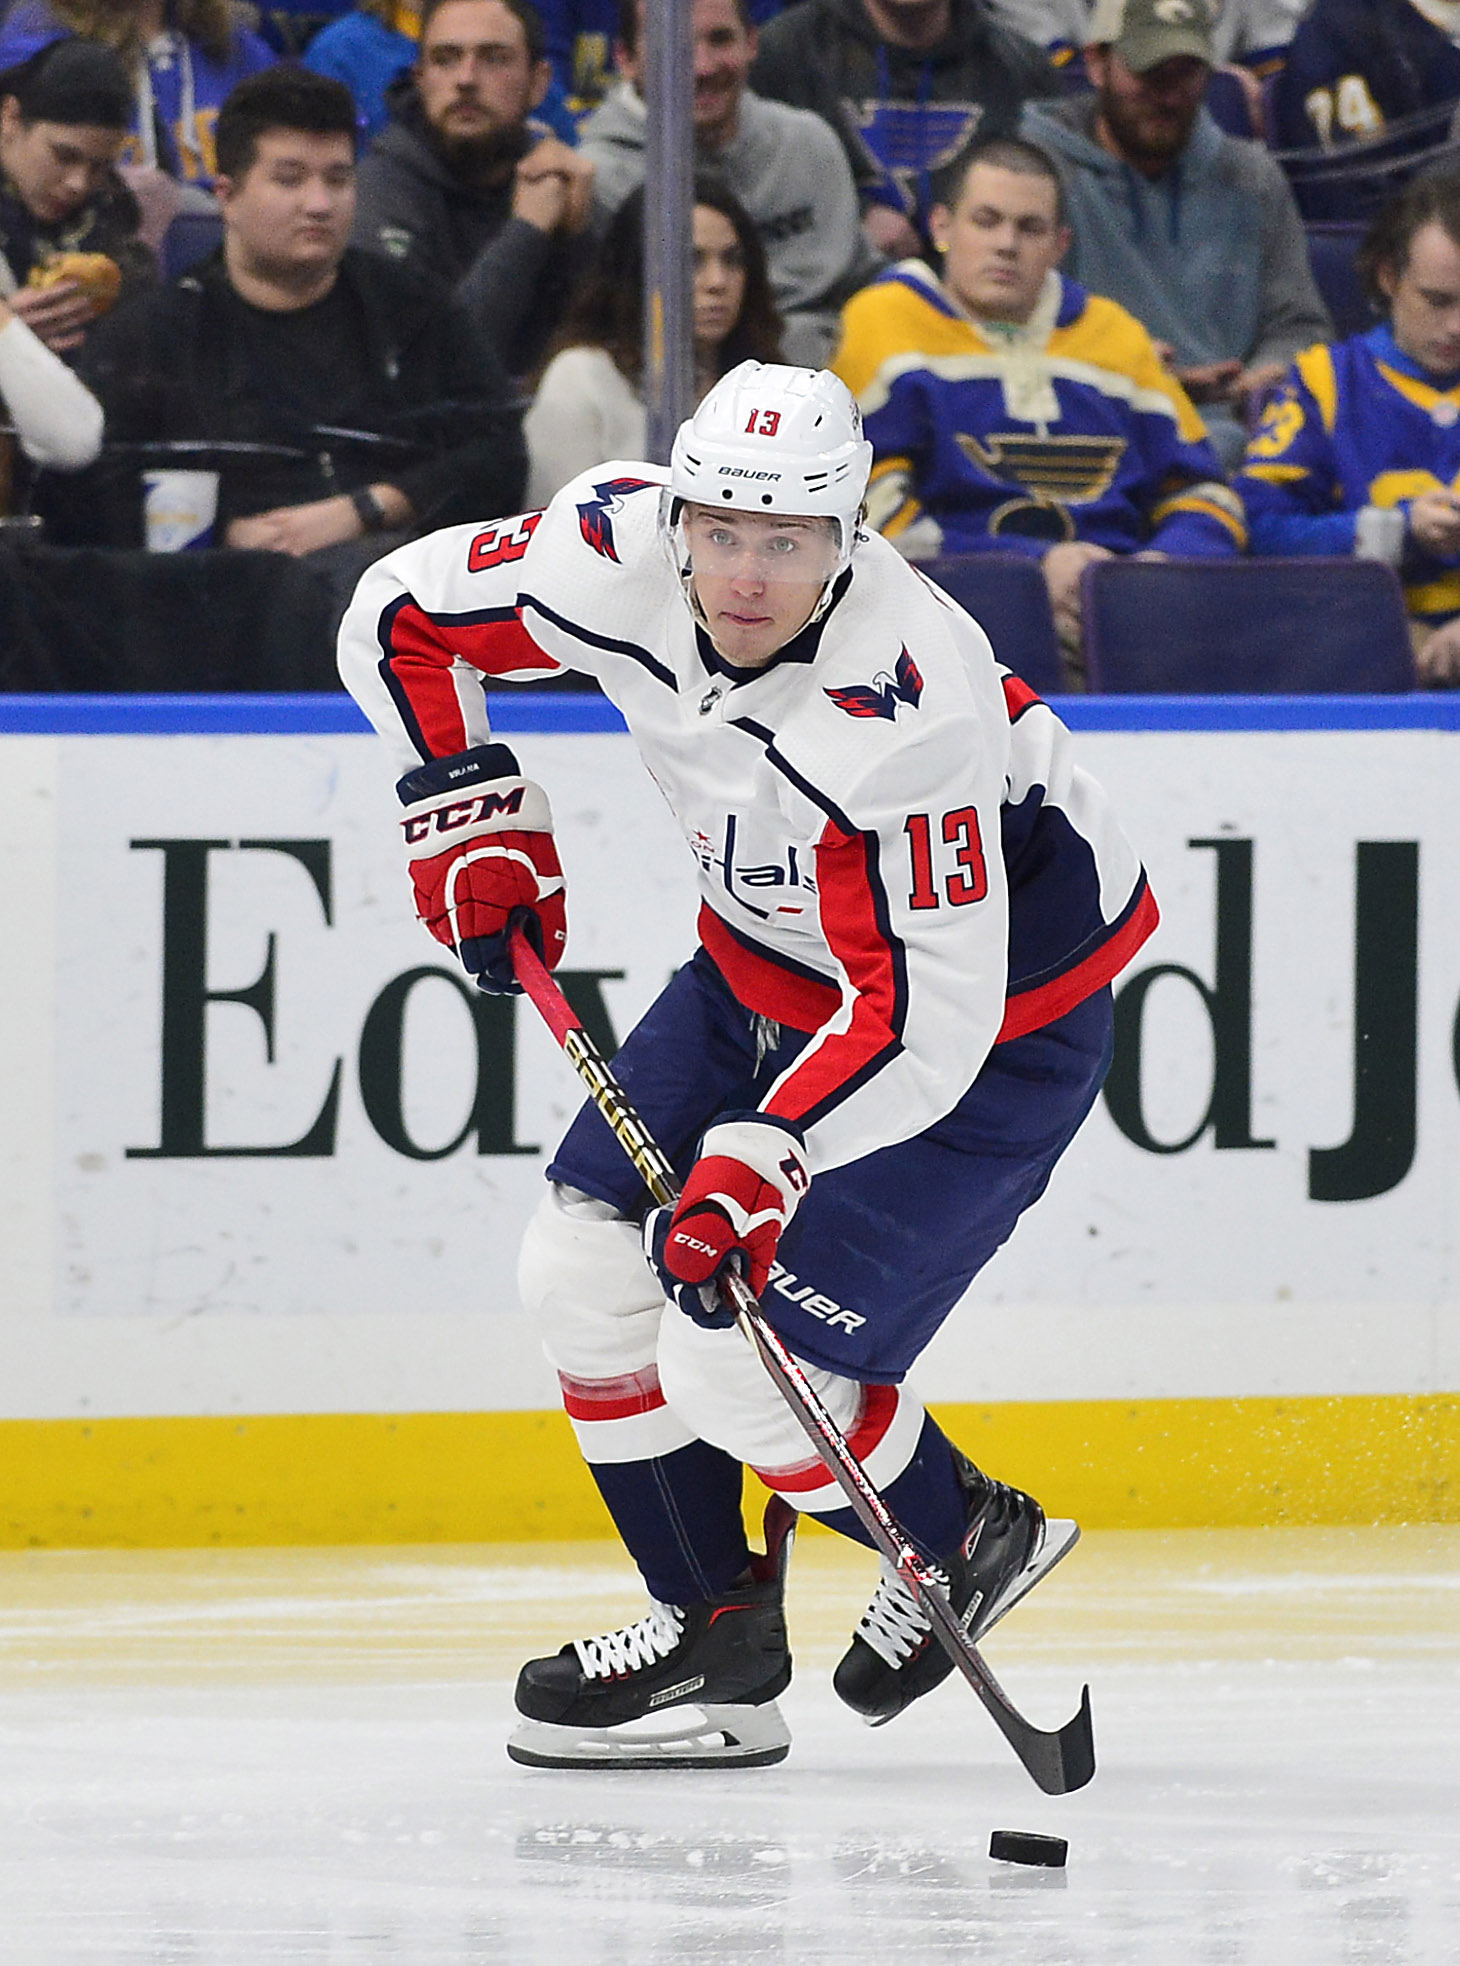 Jakub Vrana signs two-year contract with Capitals